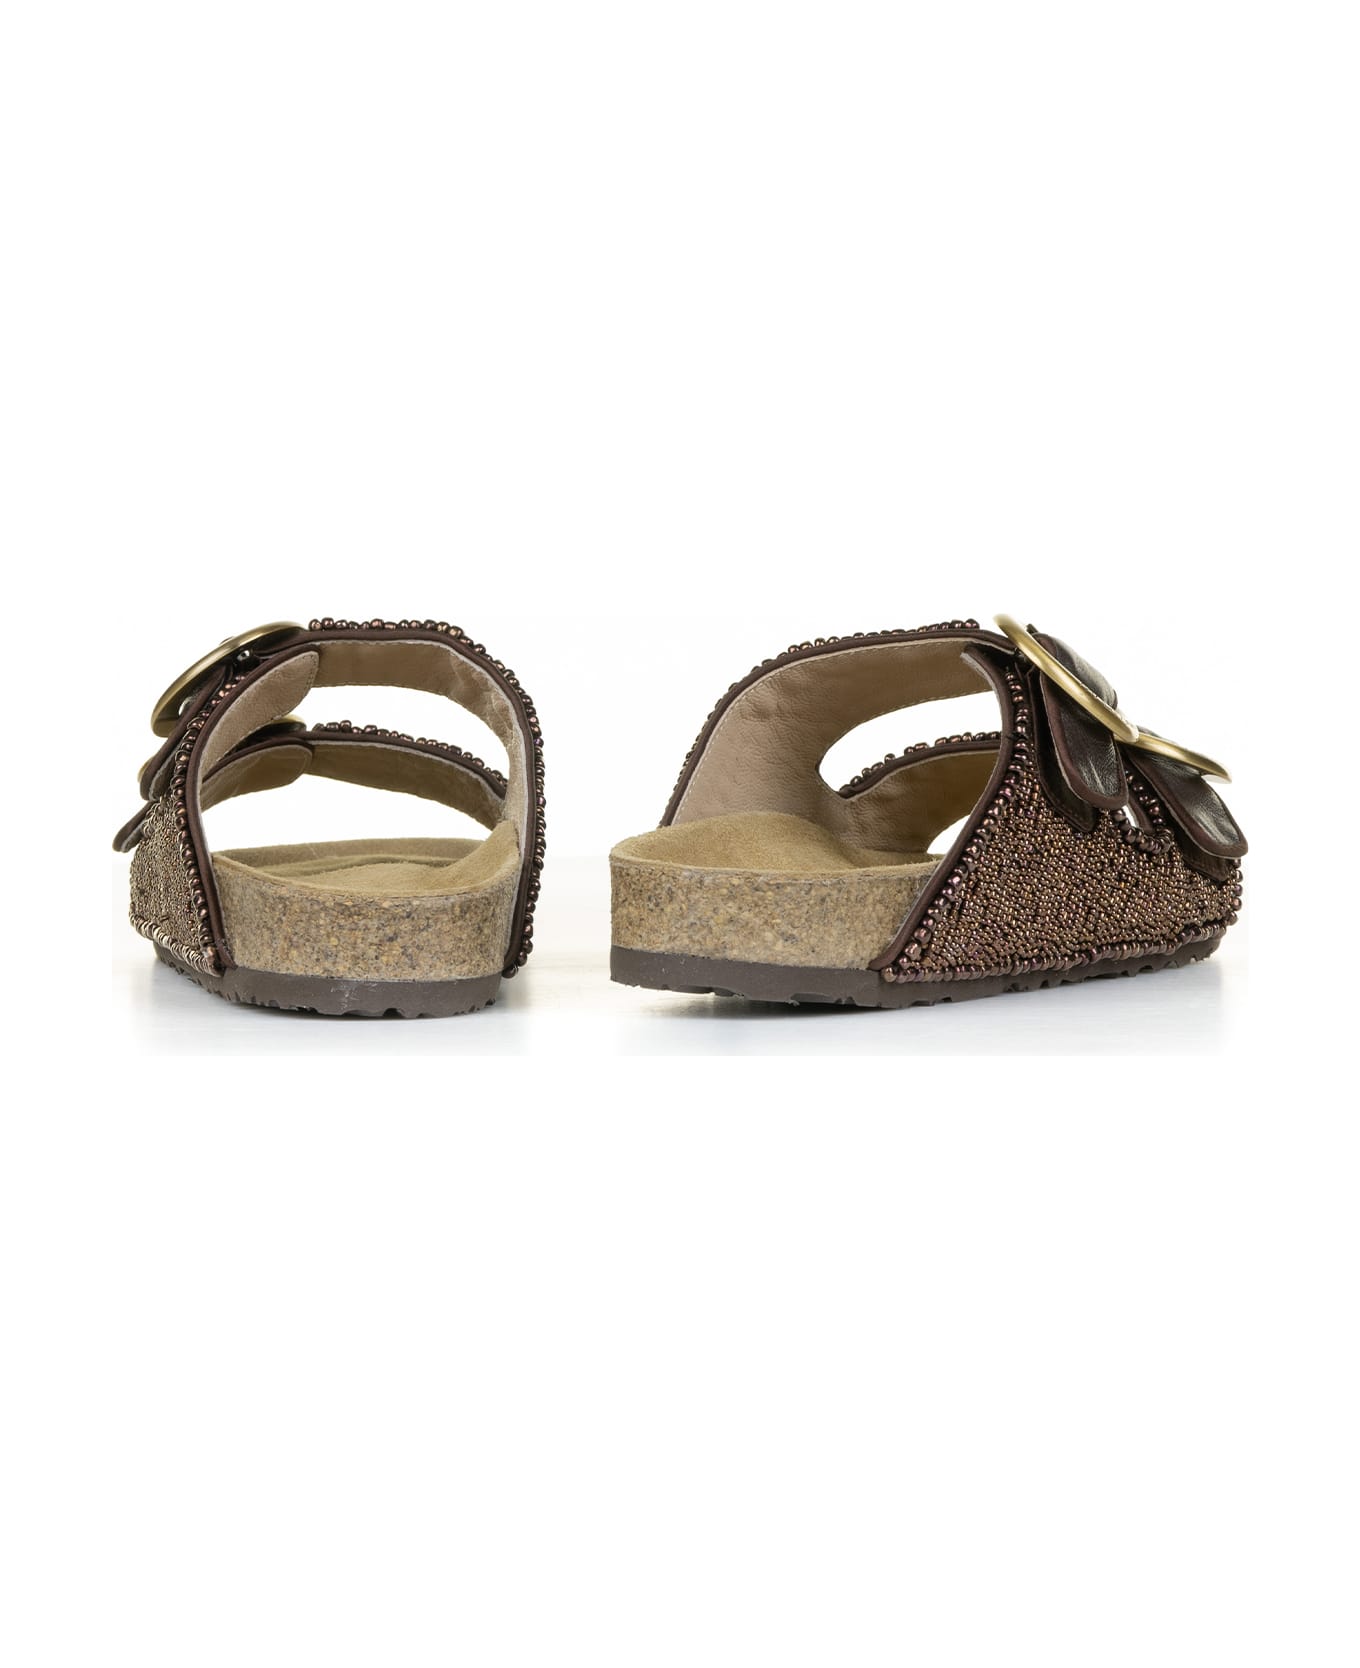 Malìparmi Slipper With Double Band In Bead Embroidery - BRONZO